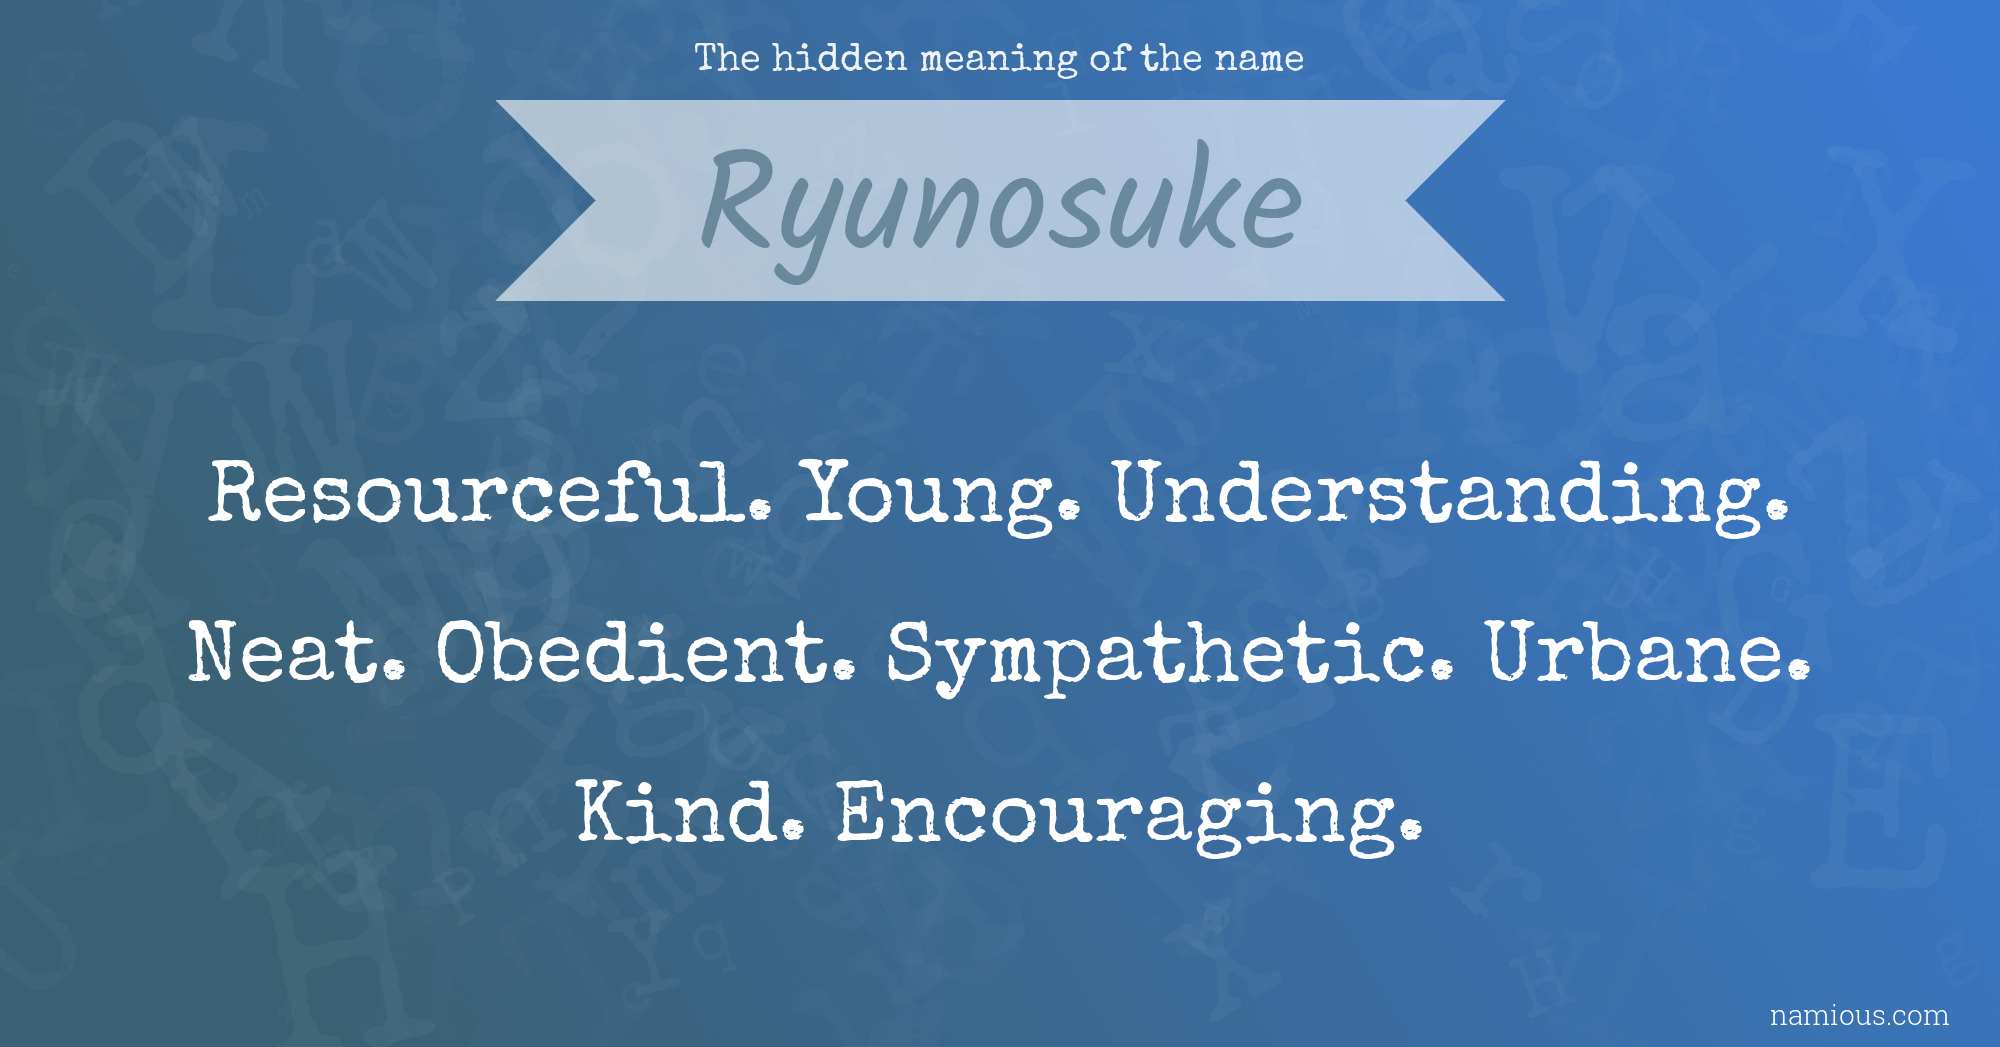 The hidden meaning of the name Ryunosuke